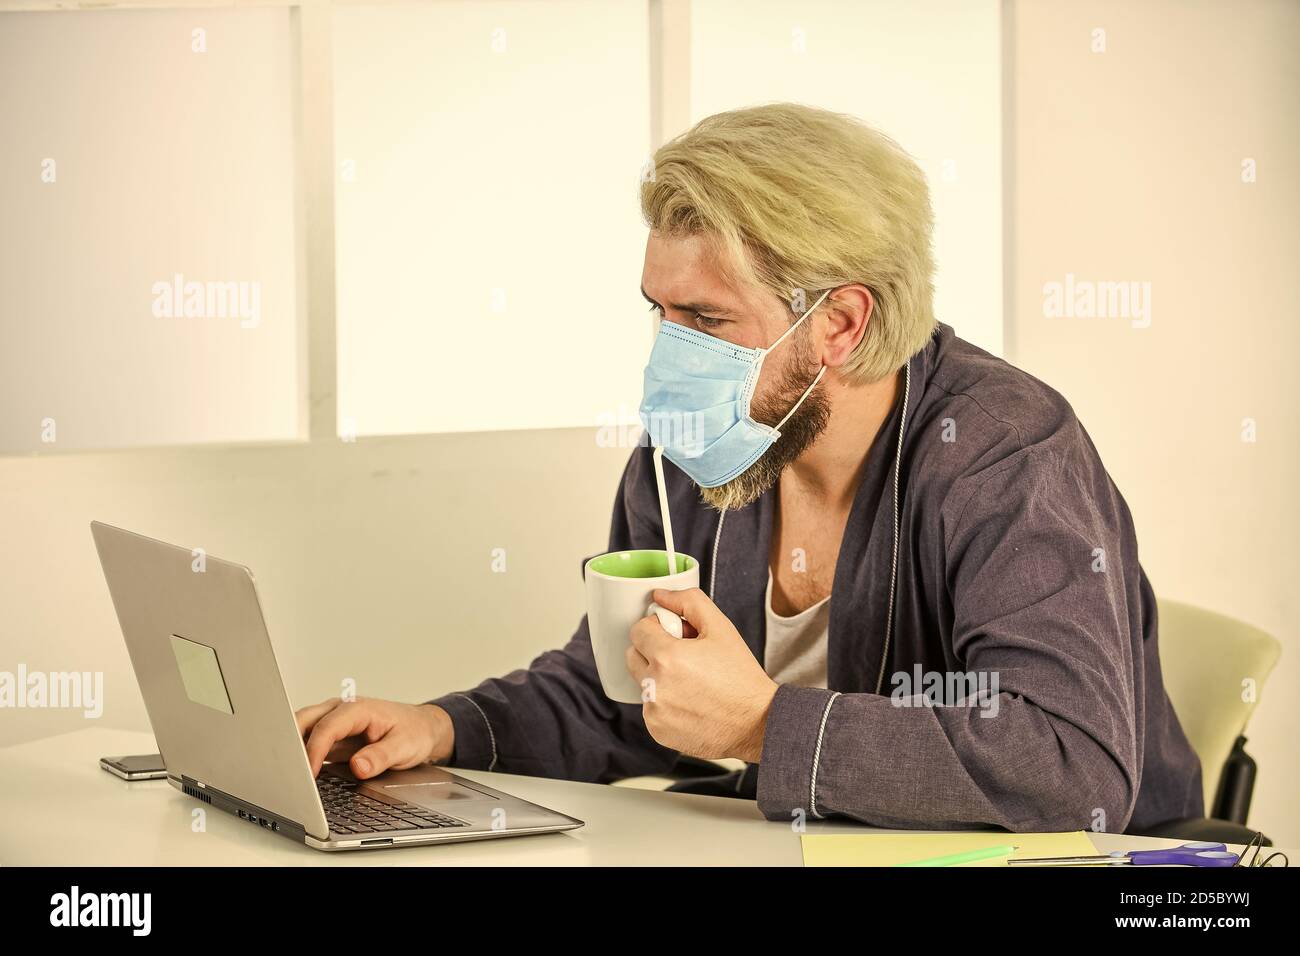 remote-based job. online shopping. man in respirator protective mask in office. work on a remote site. distance learning. infection control and prevention measures. keep your distance. Stock Photo